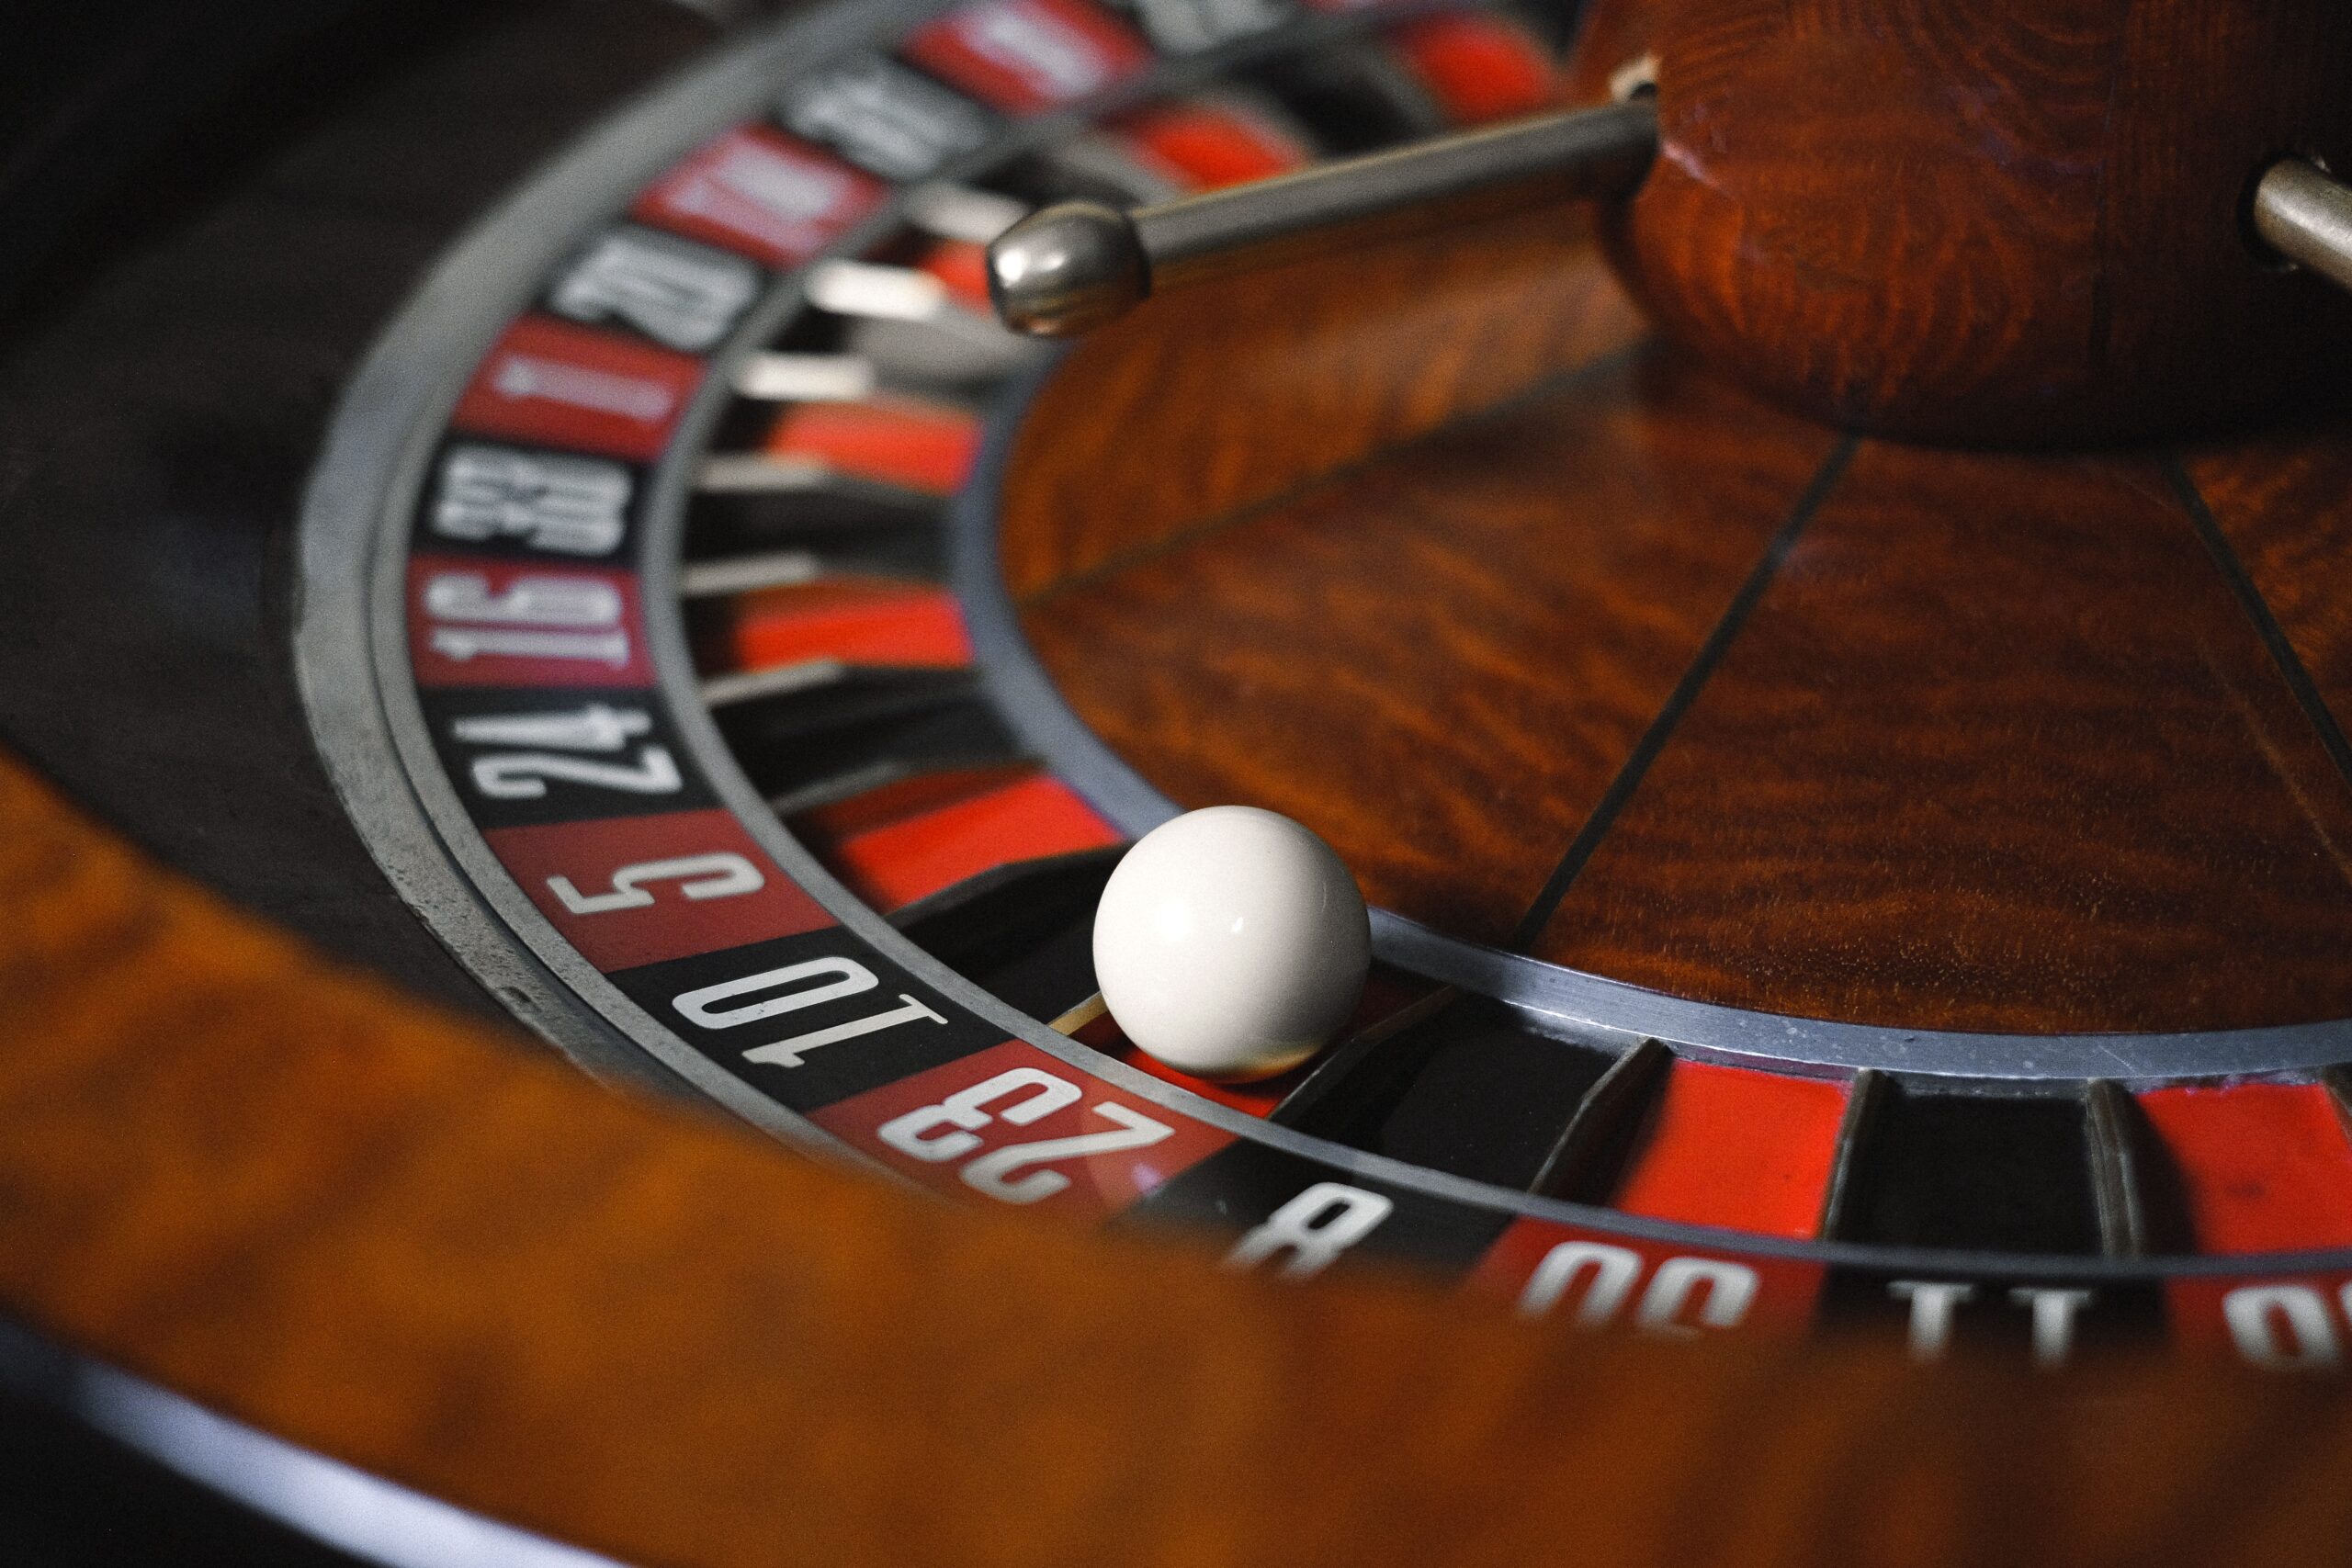 Choose only legal and regulated online casinos that offer no deposit bonuses.